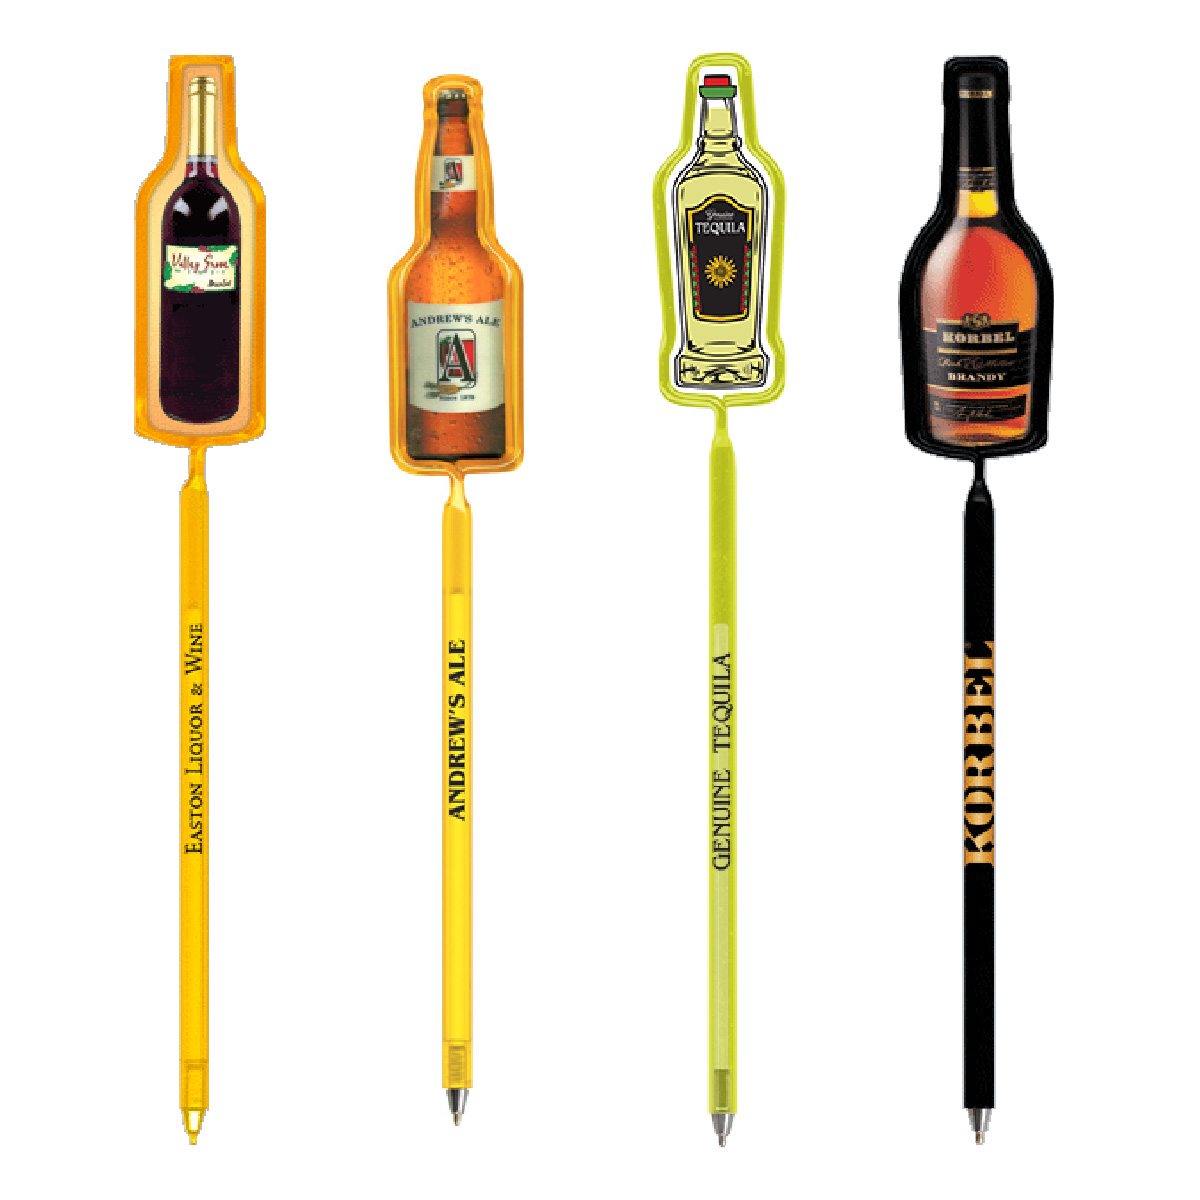 Promotional Beer, Wine and Liquor Bottle Shaped Bent Pens